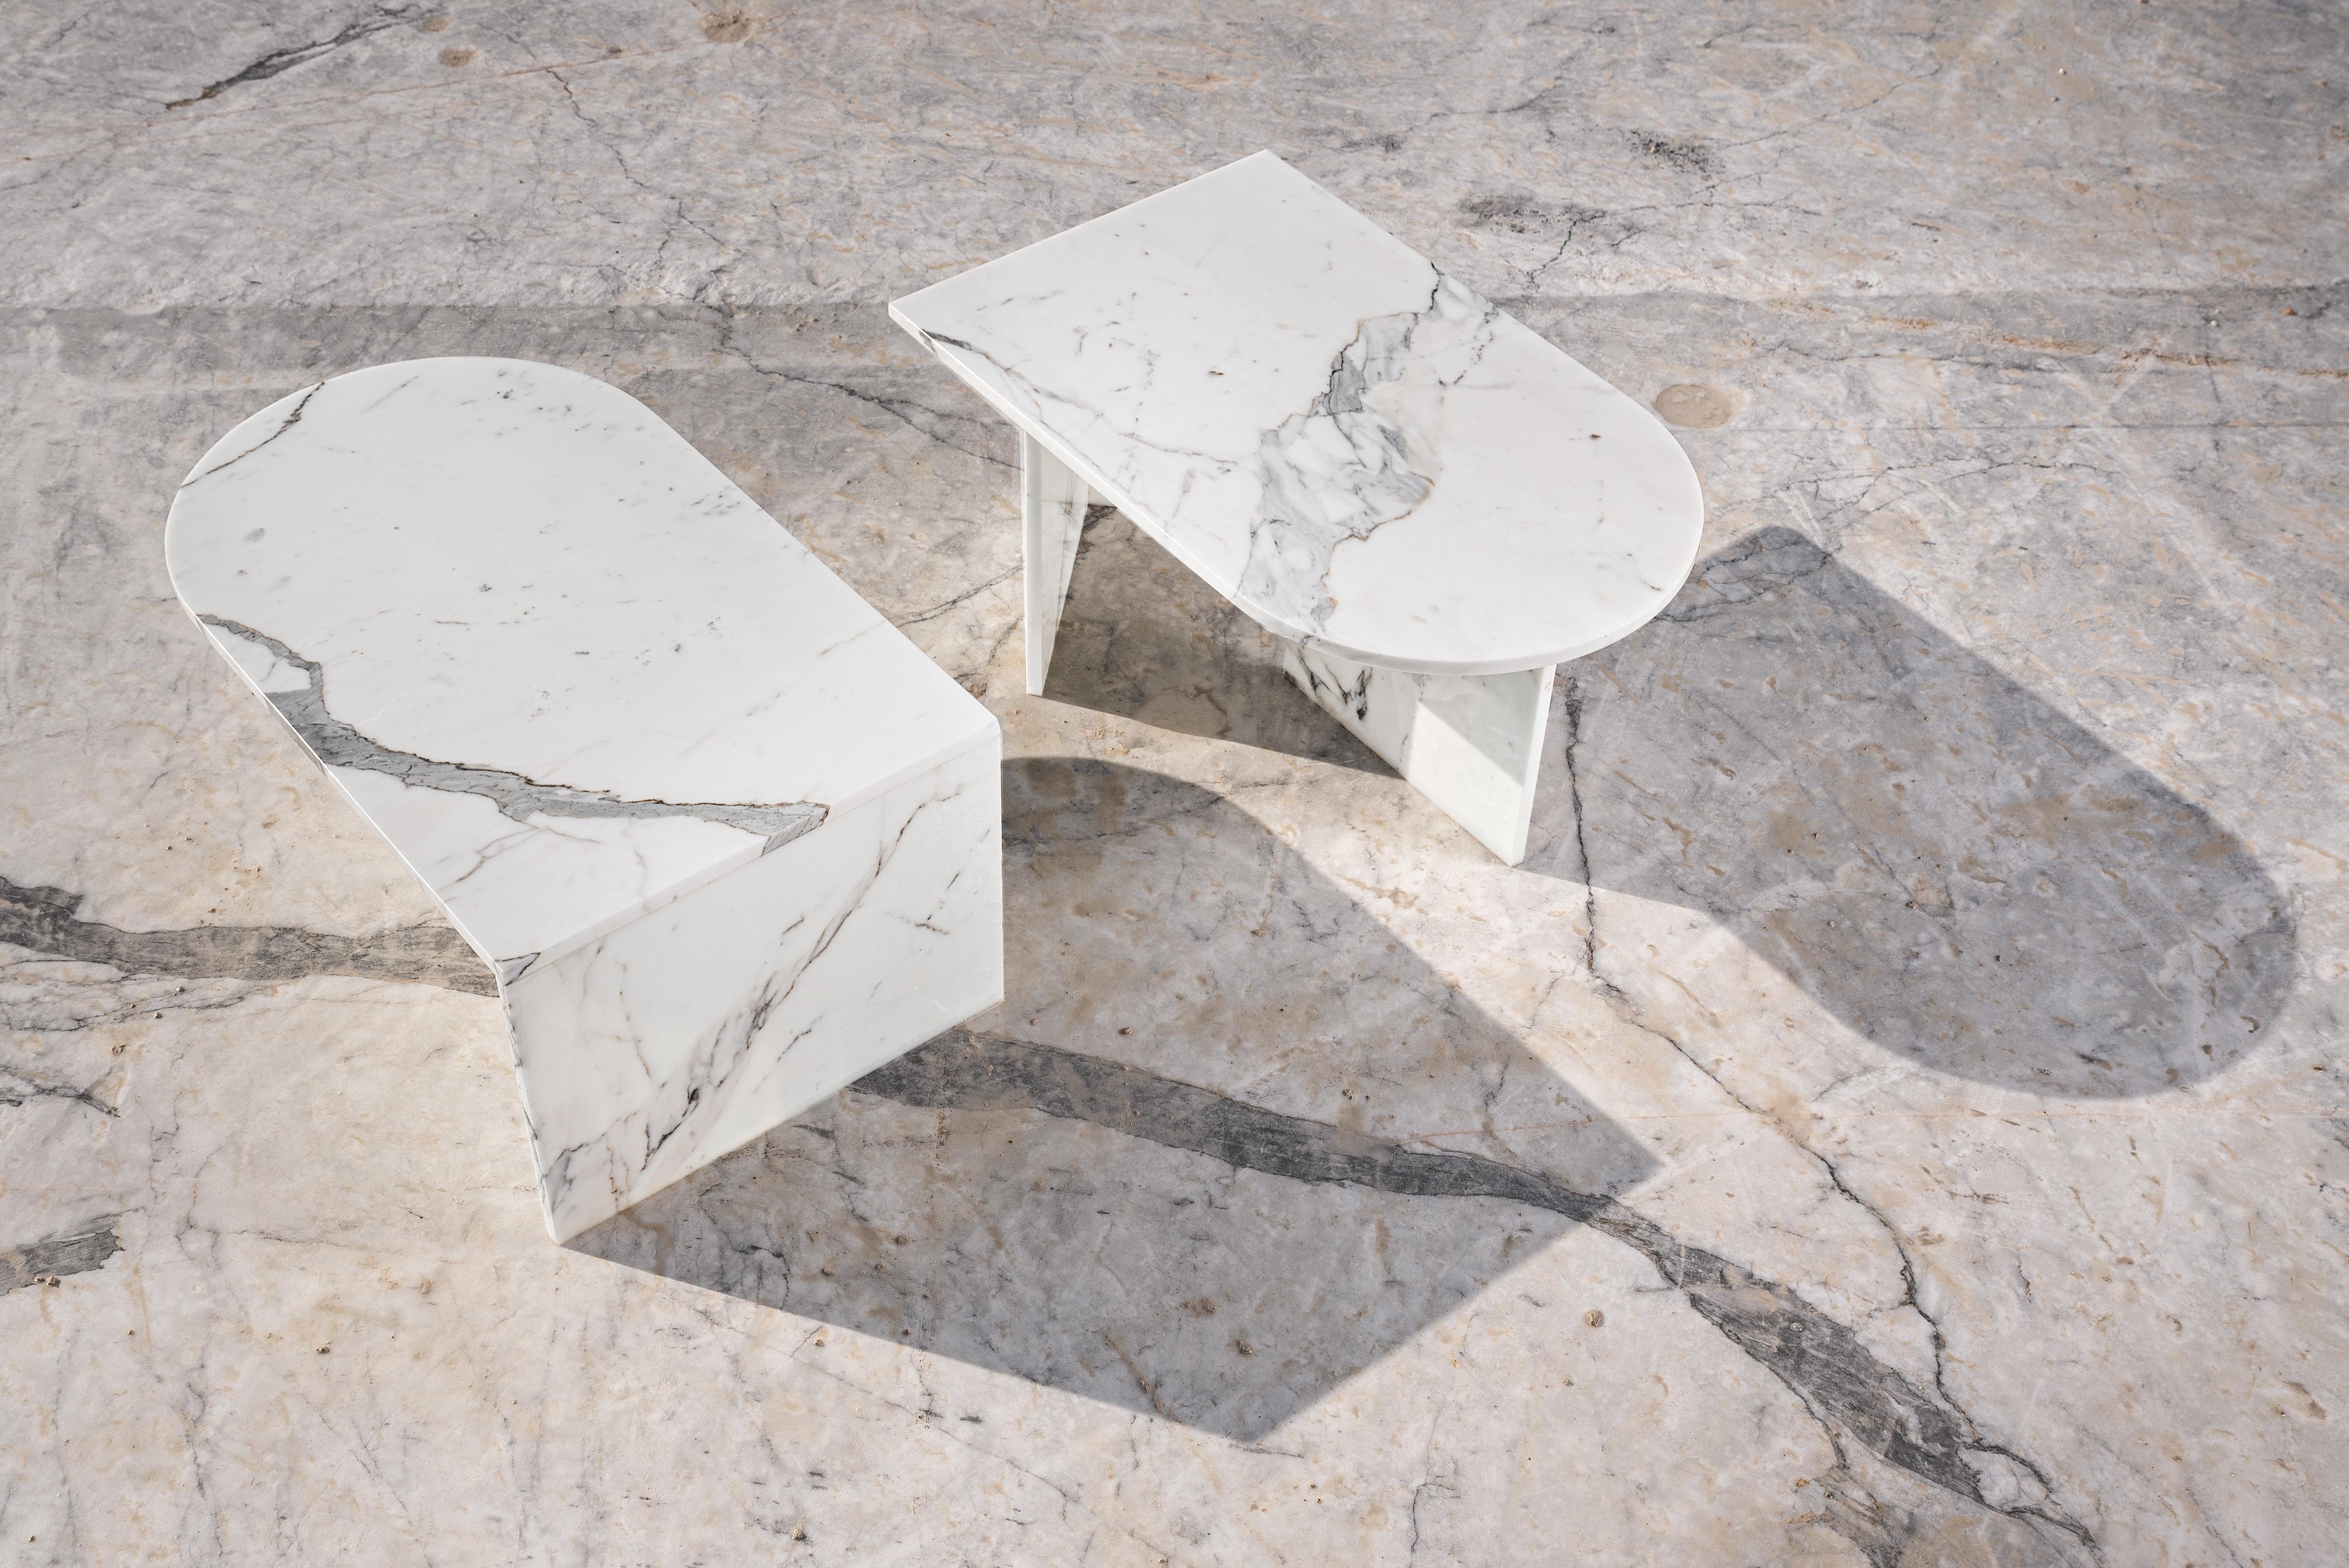 Marble side table set by Edition Club.
Dimensions: L 90 x W 55 x H 40 cm.
Materials: Arabascato marble direct from the hills of Carrara, Italy.

Edition/Club is born from an environmental consciouness of reducing waste generated from the stone